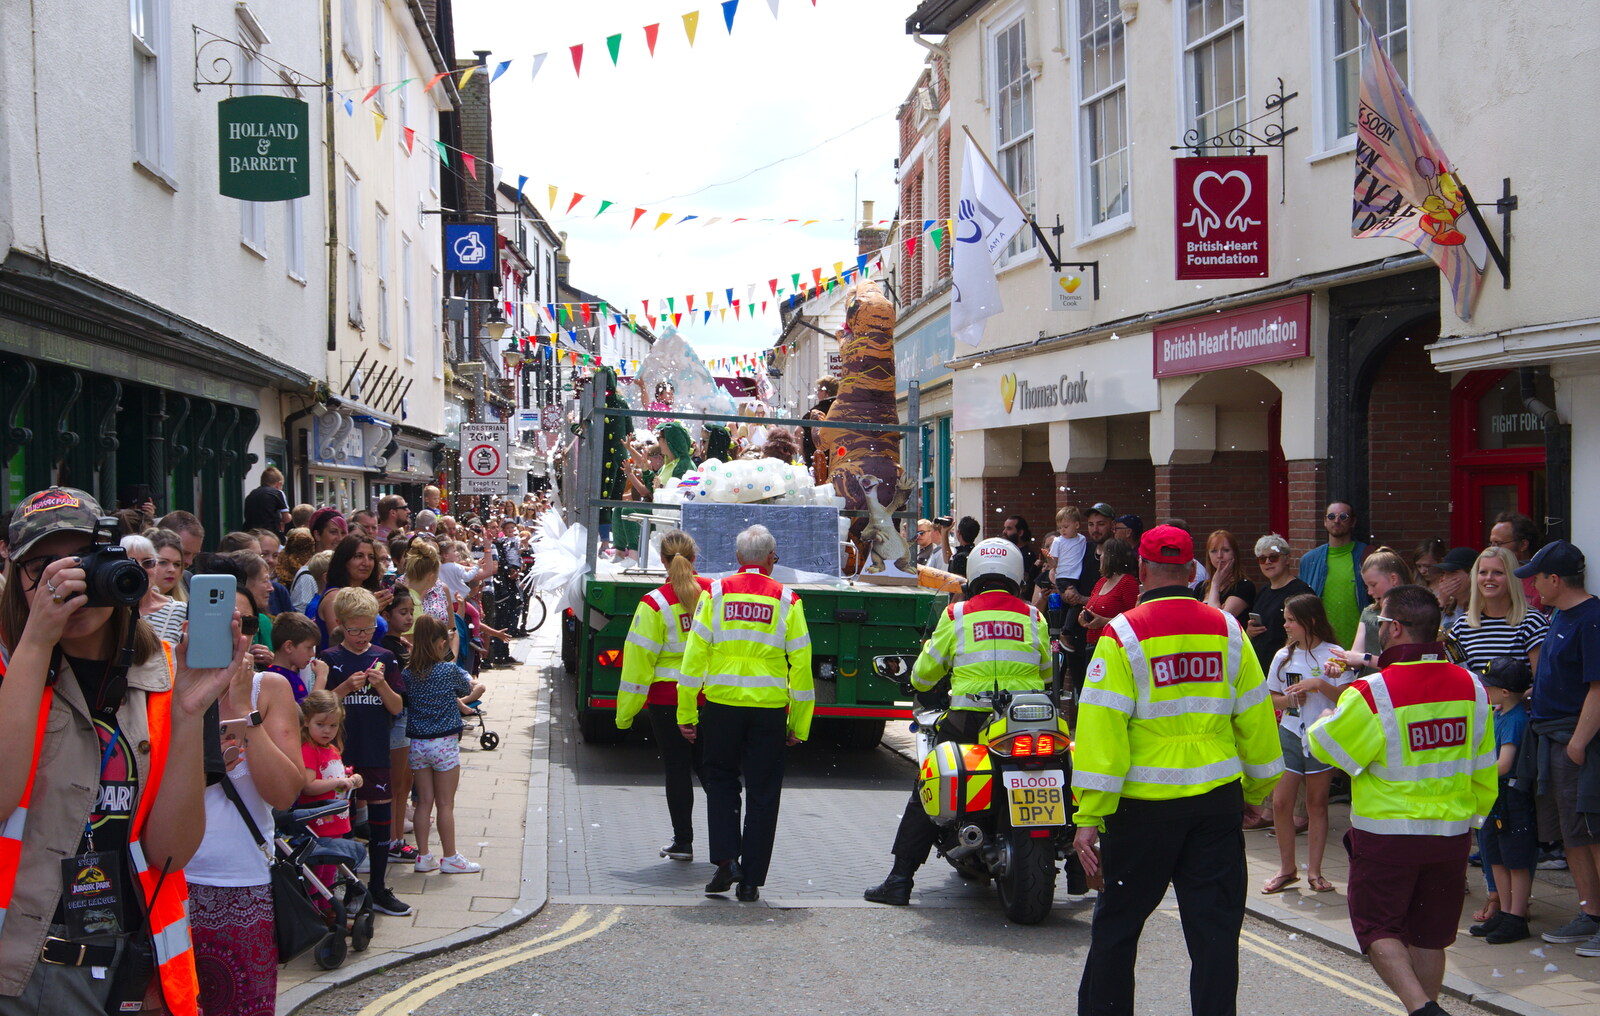 The Blood Transfusion team on Mere Street from The Diss Carnival 2019, Diss, Norfolk - 9th June 2019